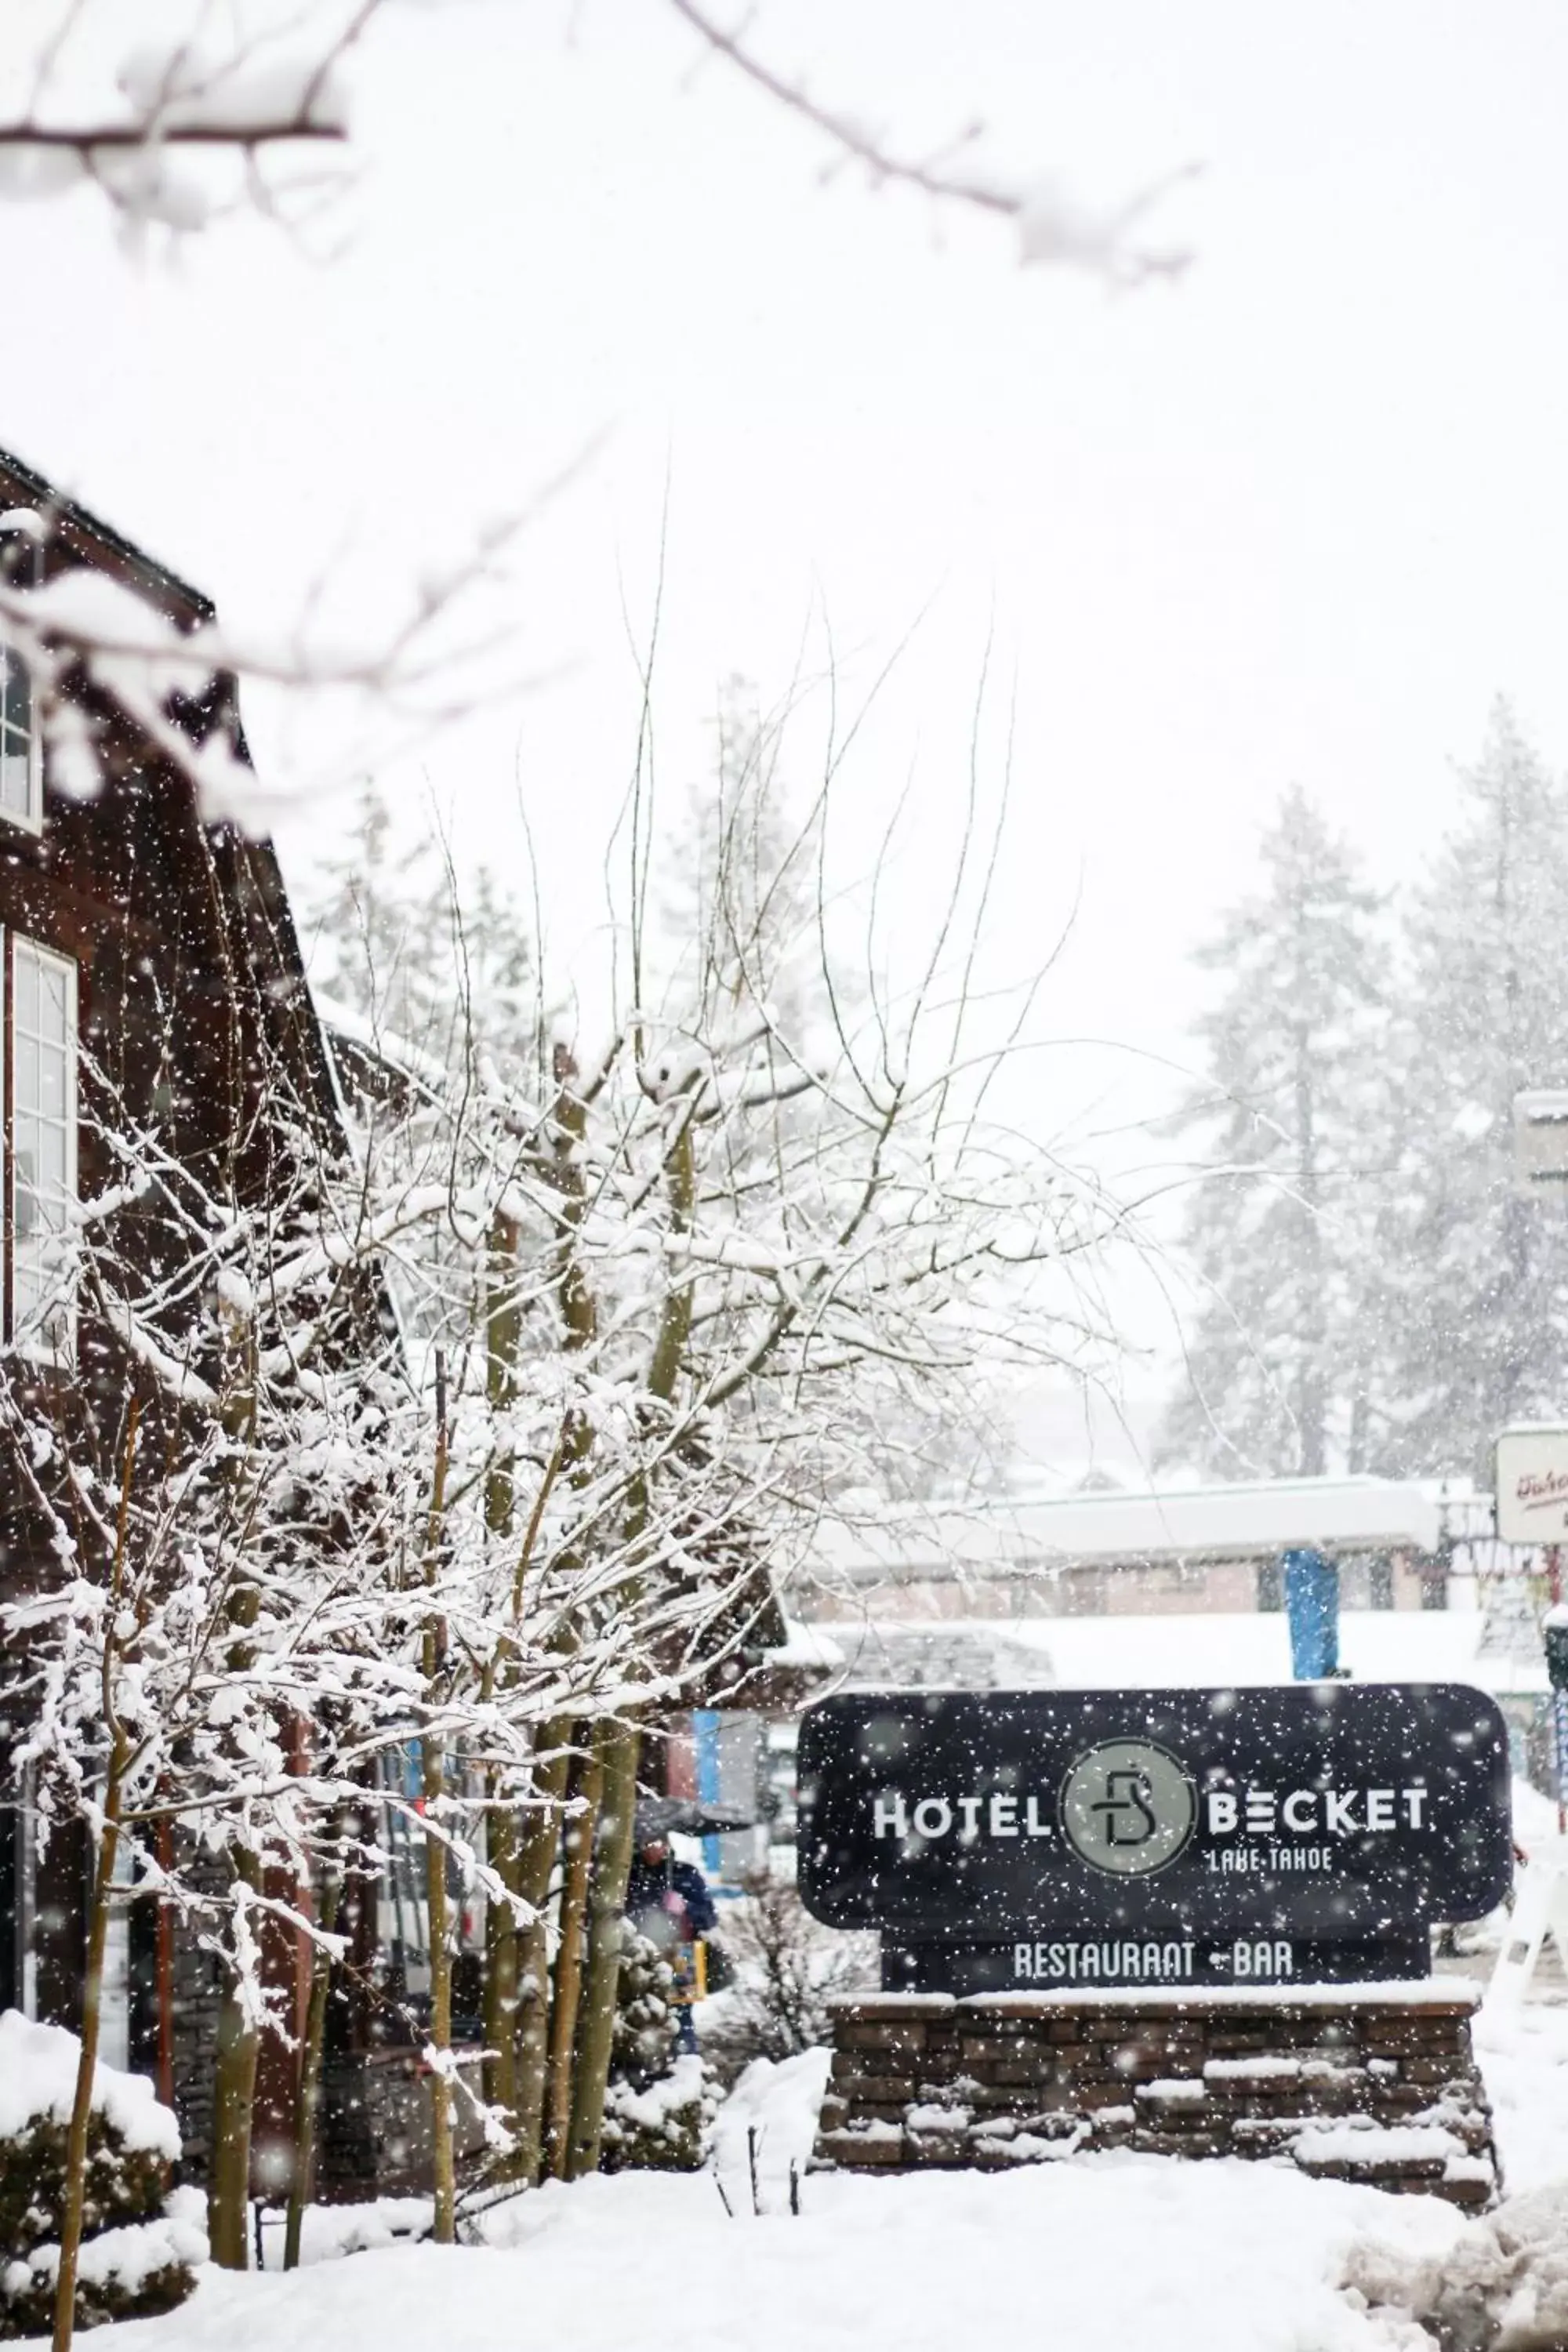 Property building, Winter in Hotel Becket